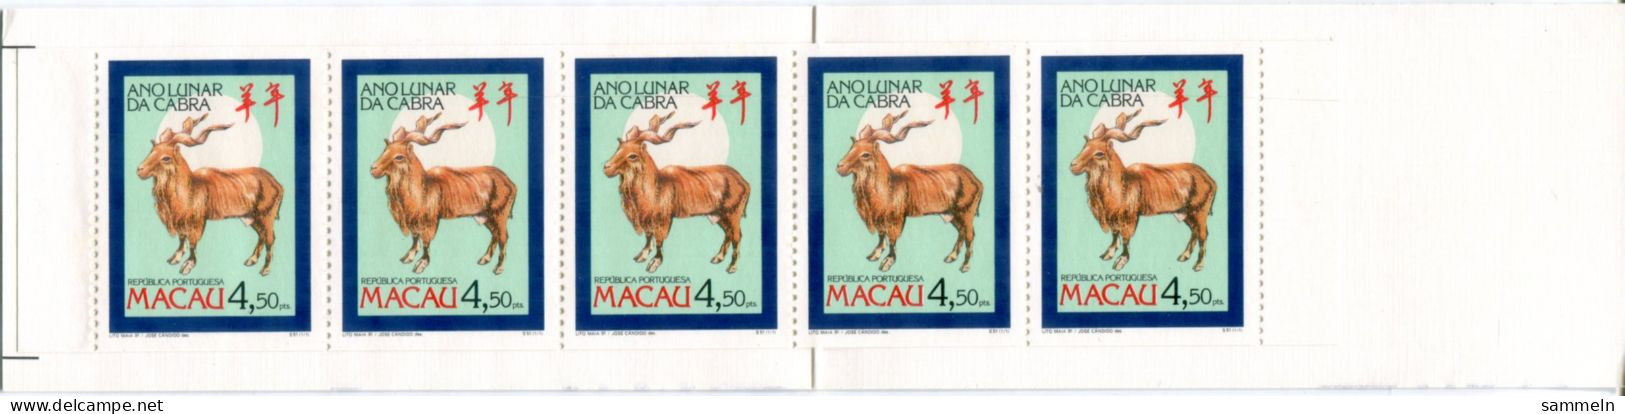 MACAO 667 C MH Mnh - Chinesisches Jahr Des Schafes, Chinese Year Of The Sheep, Année Chinoise Du Mouton - MACAU - Cuadernillos